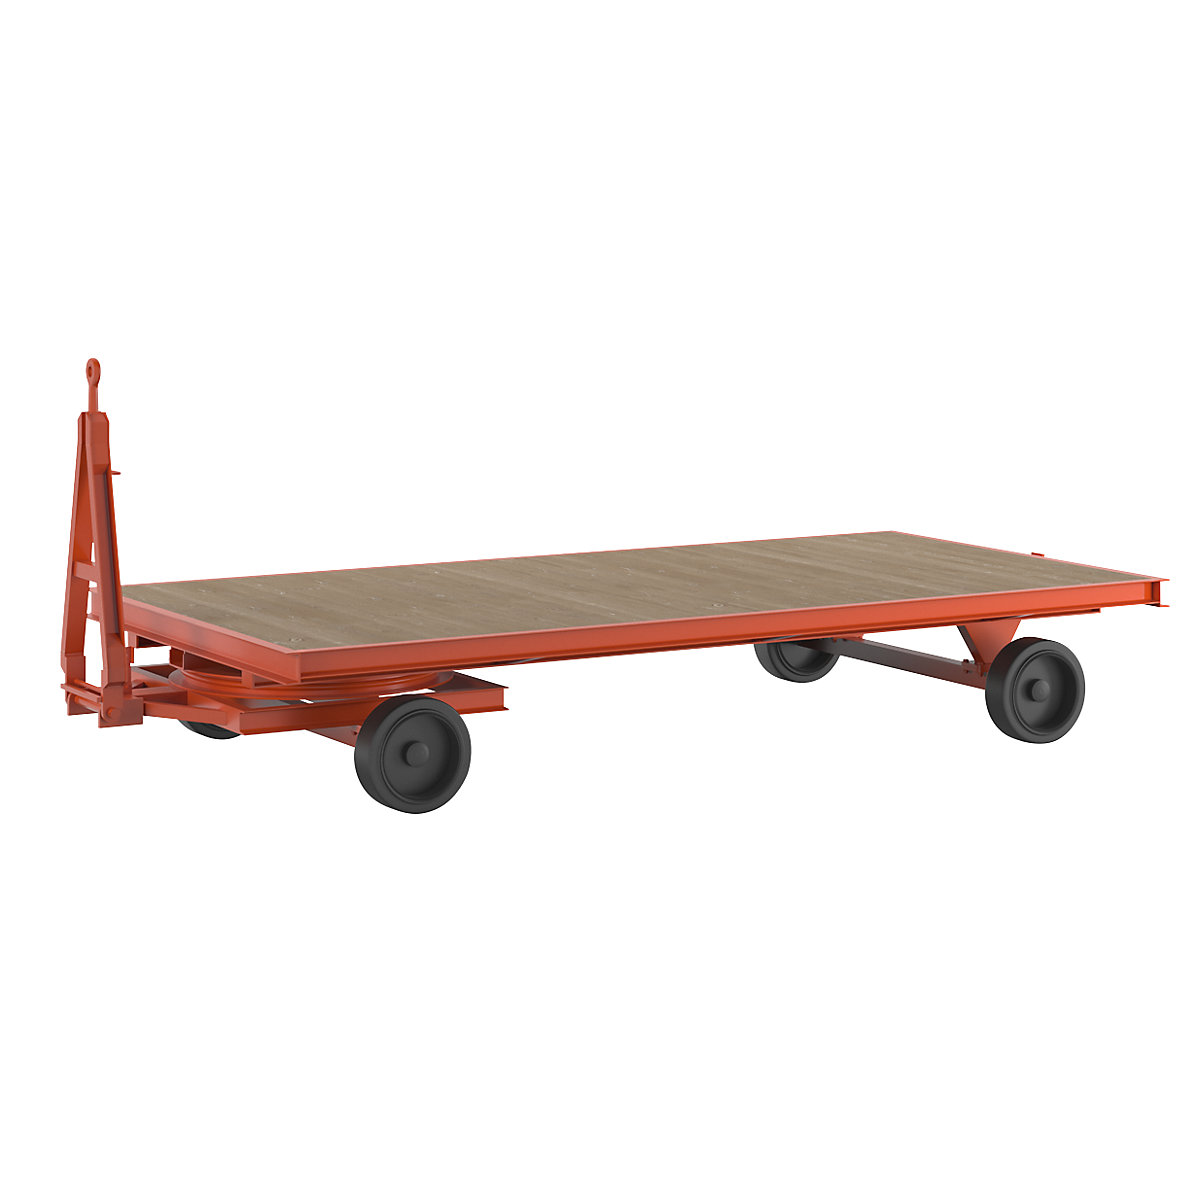 Trailer, 4-wheel double turntable steering, max. load 8 t, platform 4.0 x 2.0 m, solid rubber tyres-1